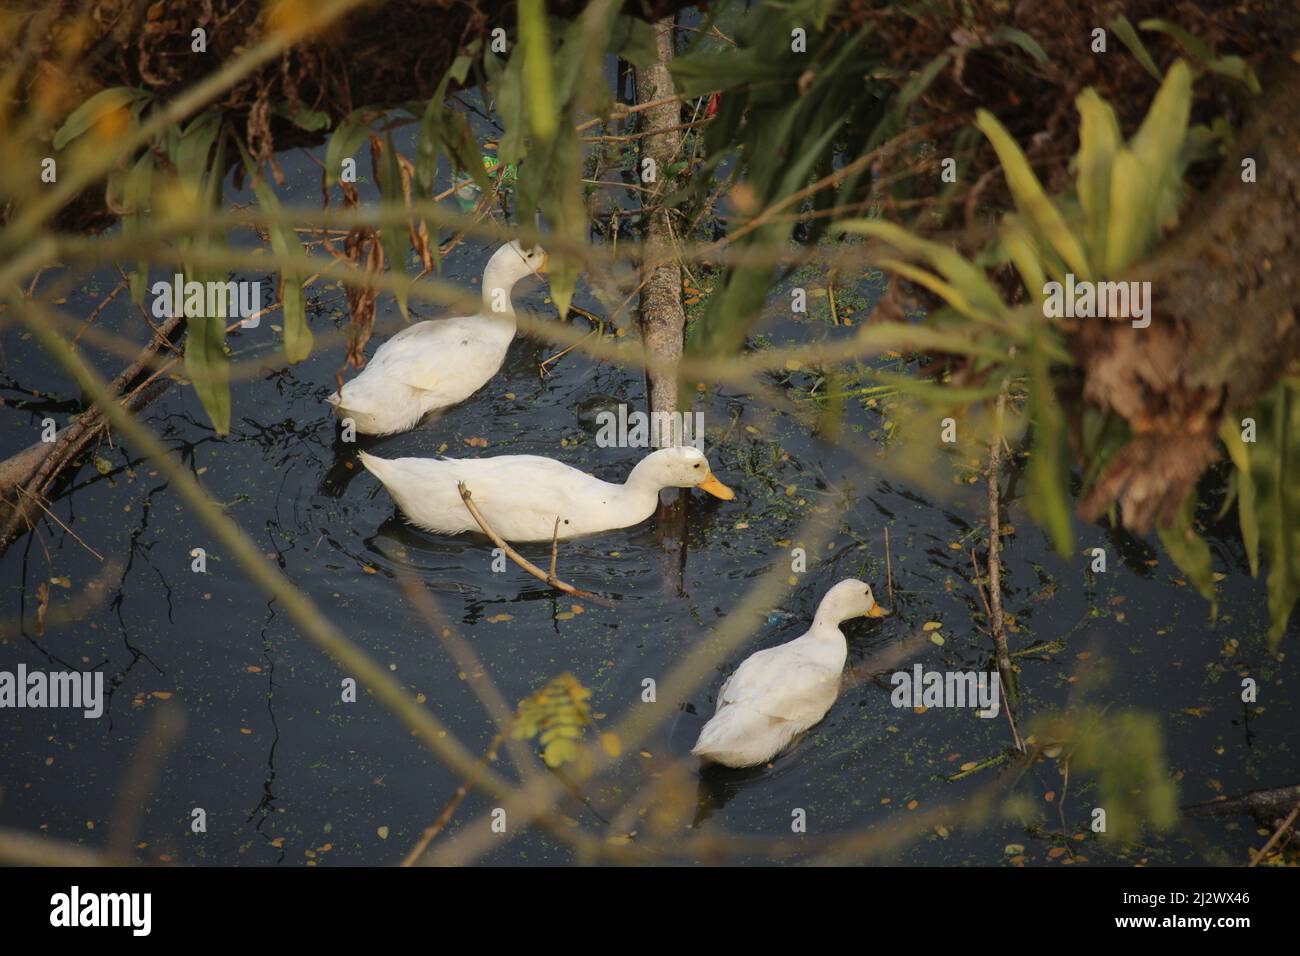 Some white ducks are swimming in the black water. Stock Photo